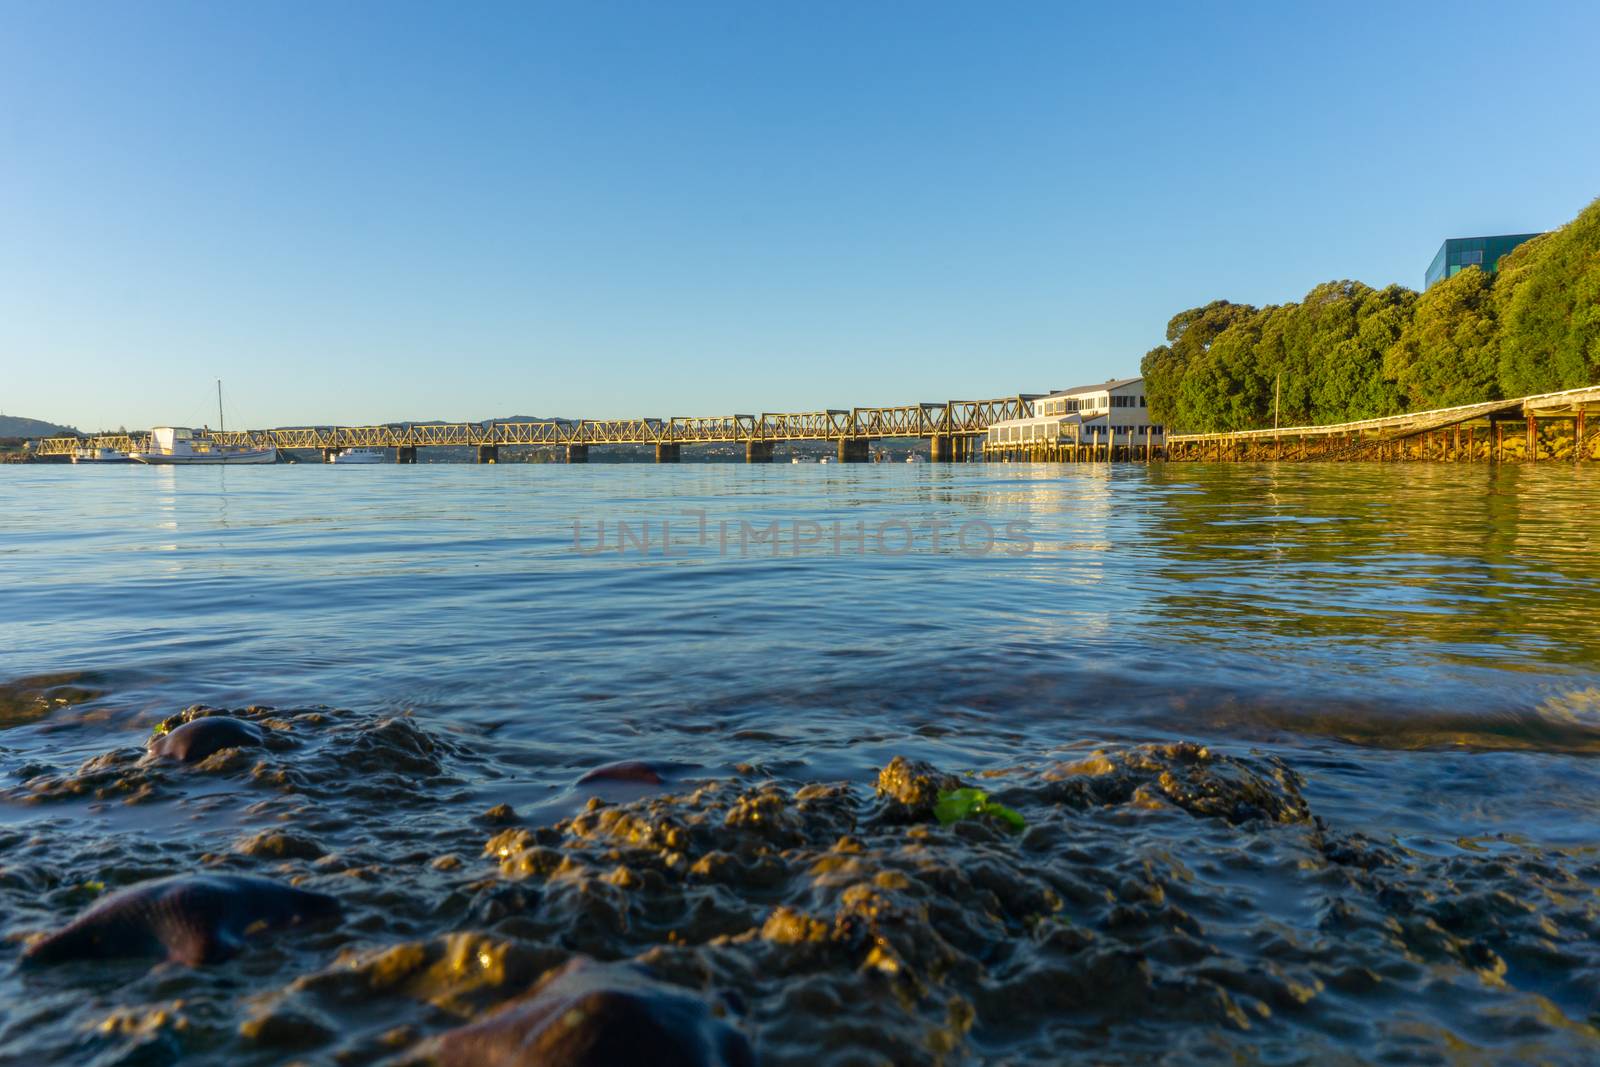 Tauranga Strand water's edge and Railway bridge catches glow from sunrise in distance across  blue calm water in low level background image.